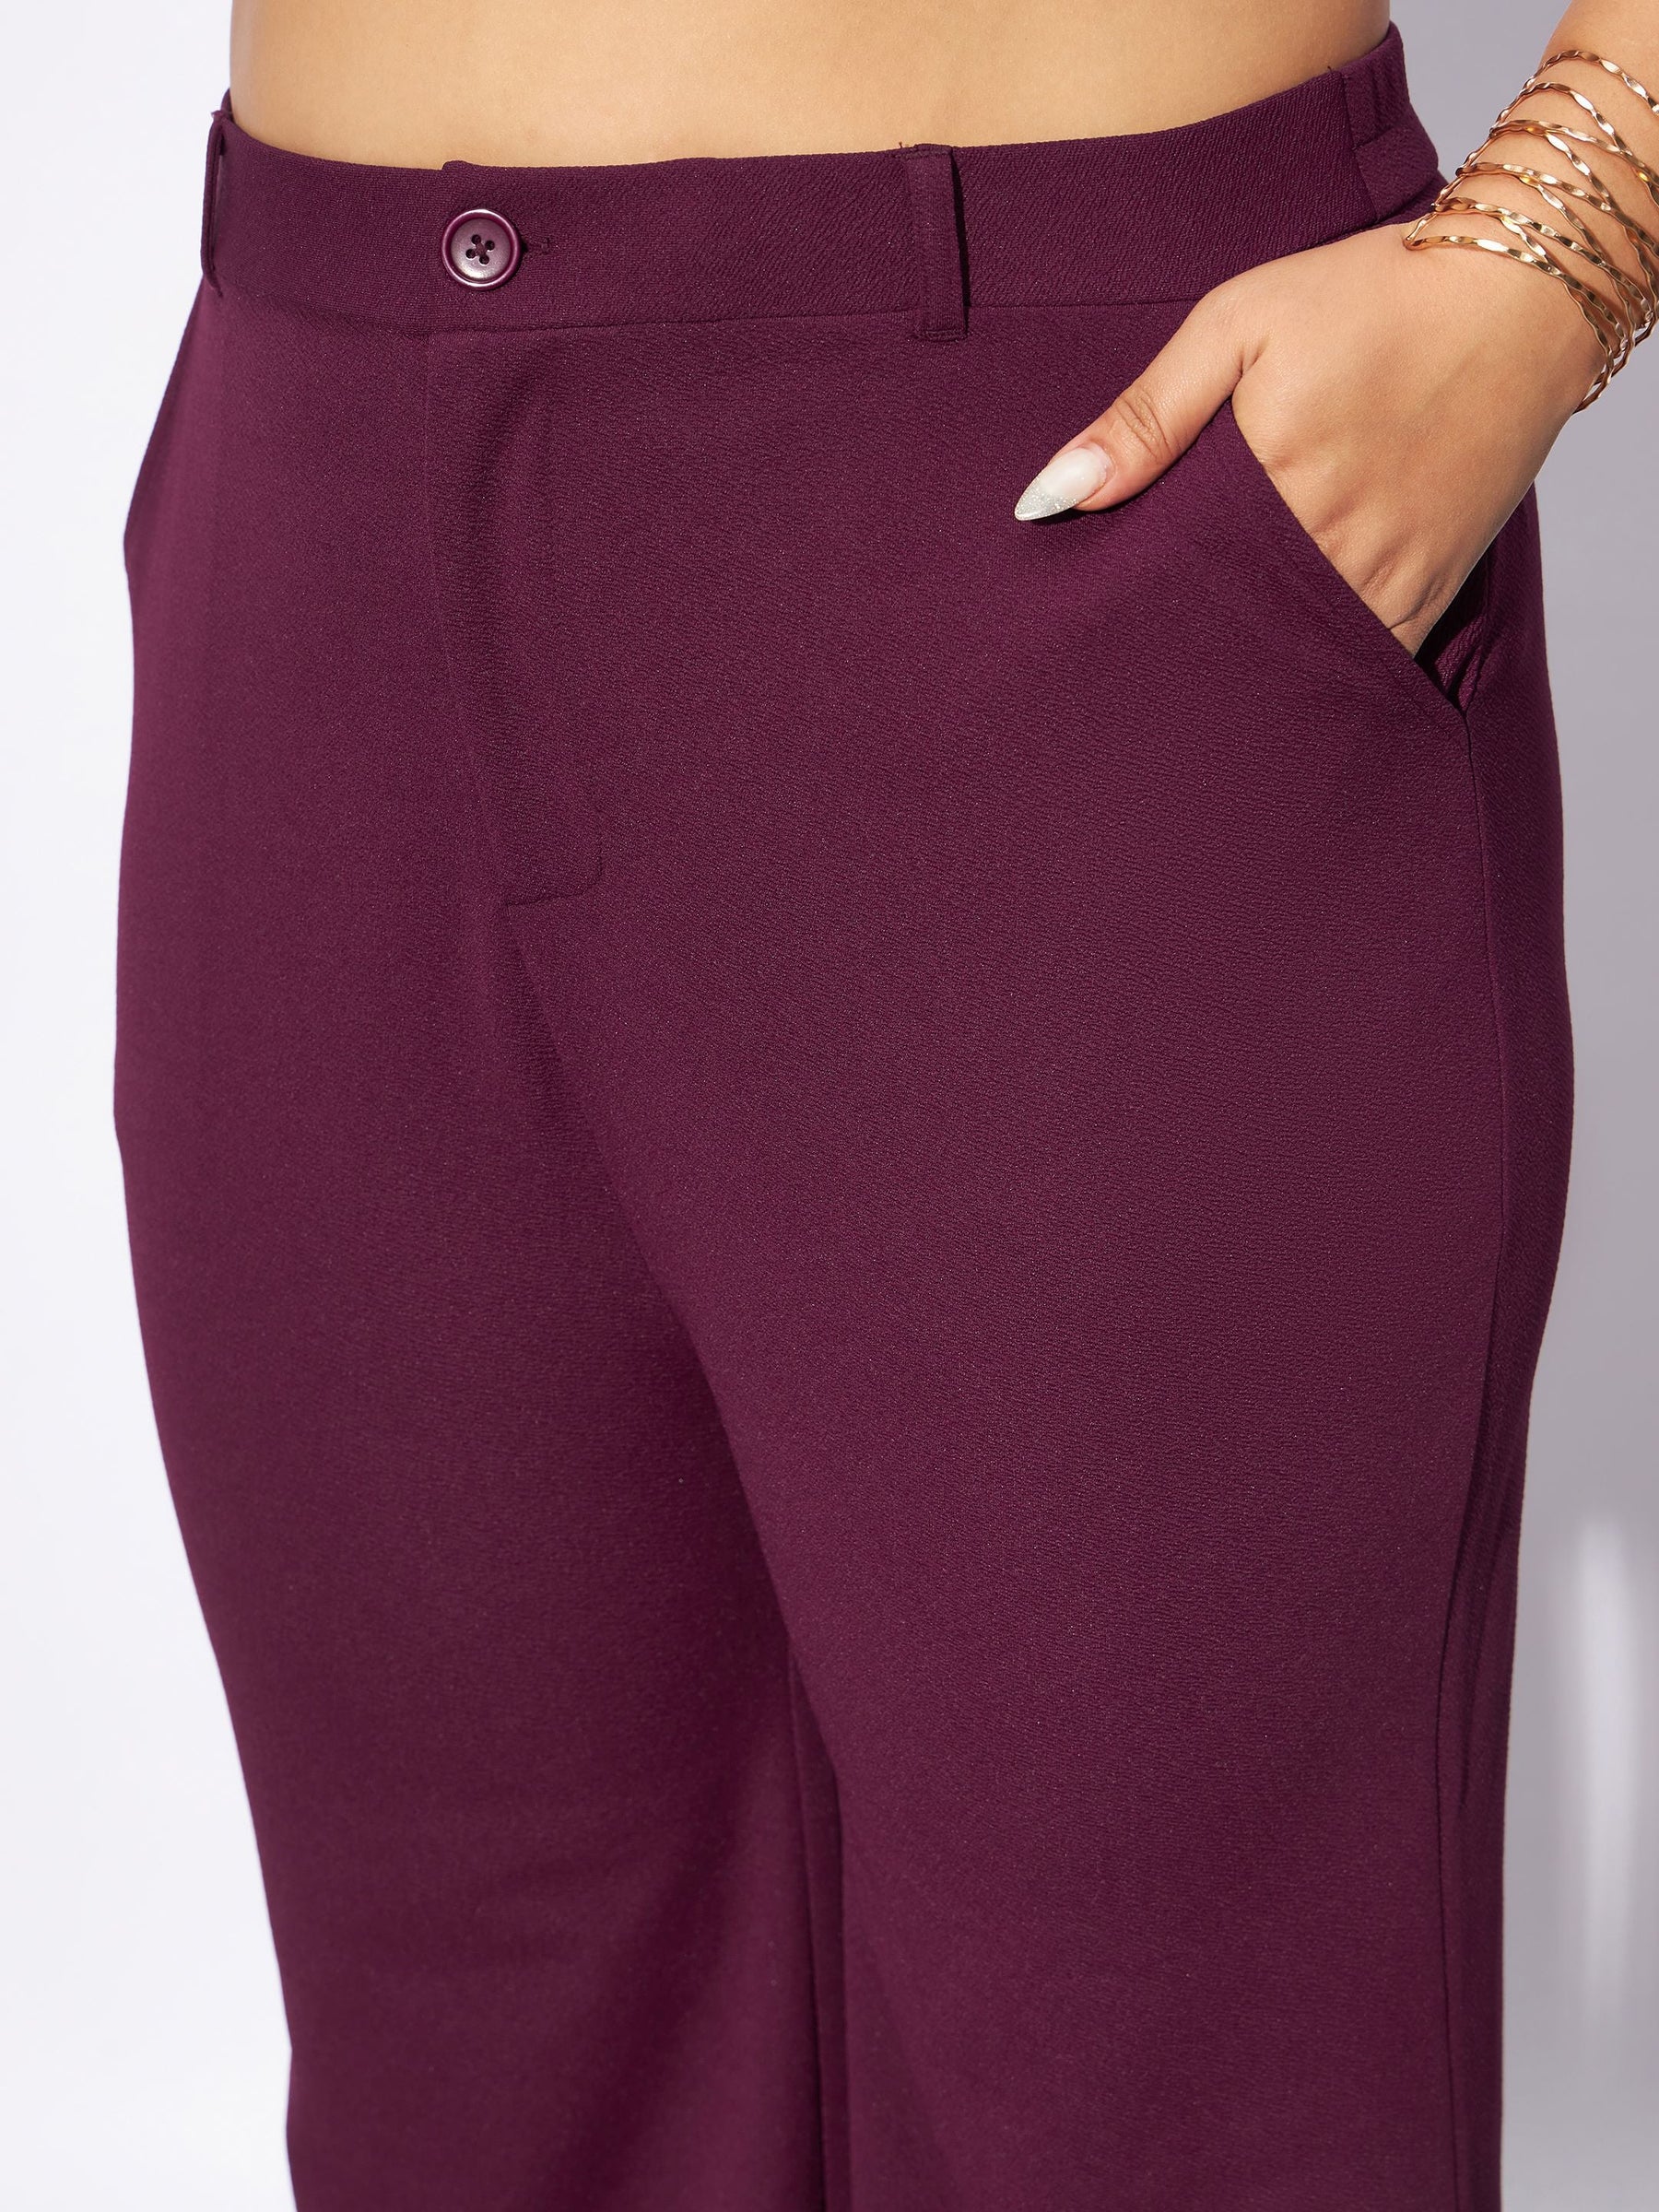 Burgundy Front Button Top With Straight Pants-SASSAFRAS Curve